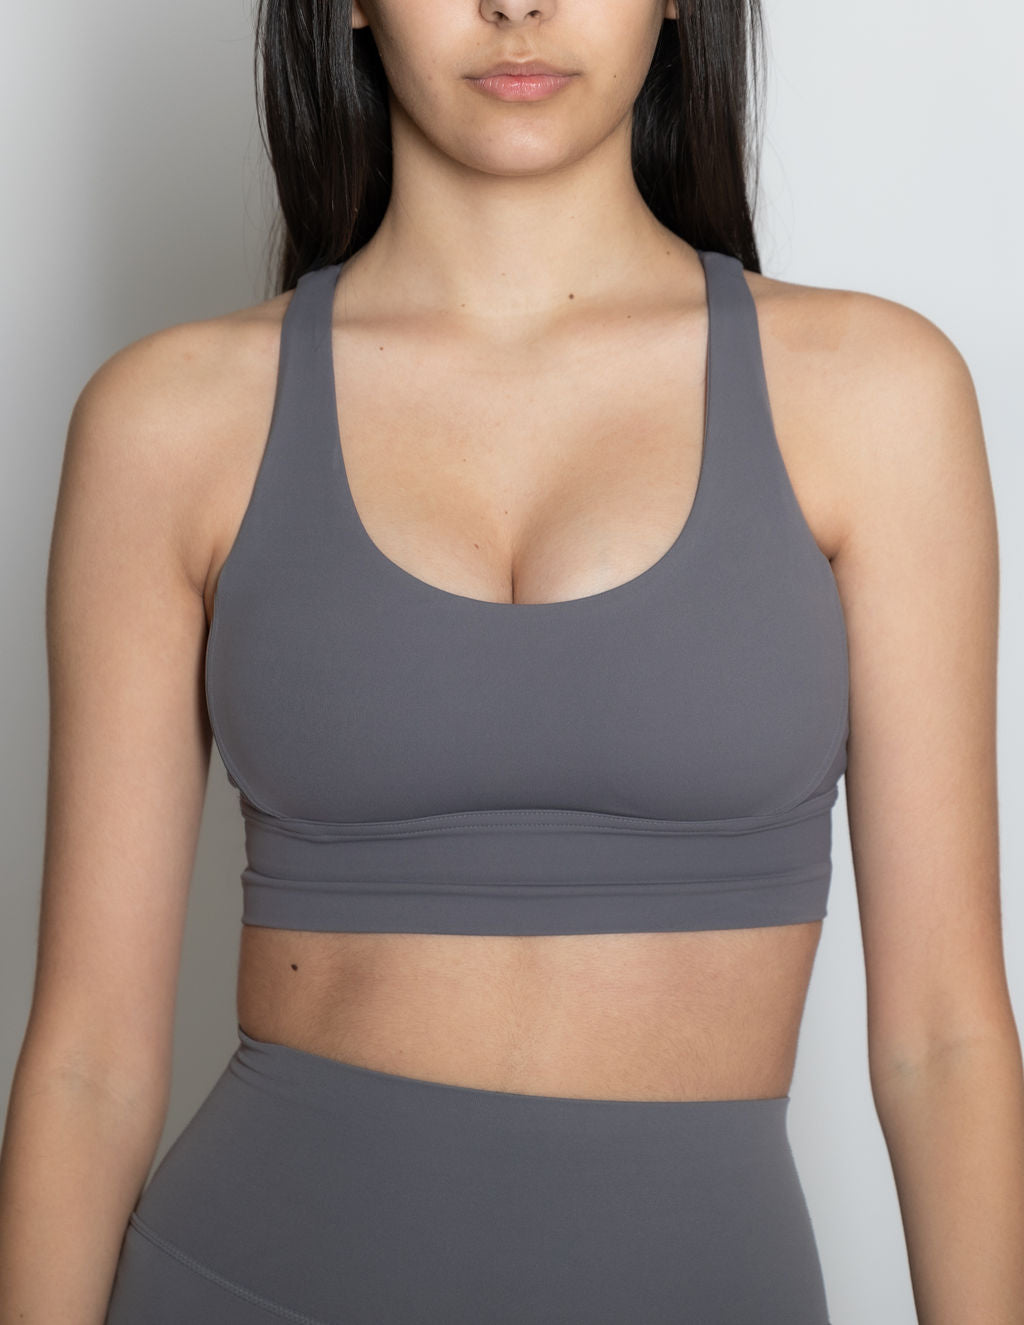 The Best Athleisure Wear: Sports Bra 2 for $50 - Karina Style